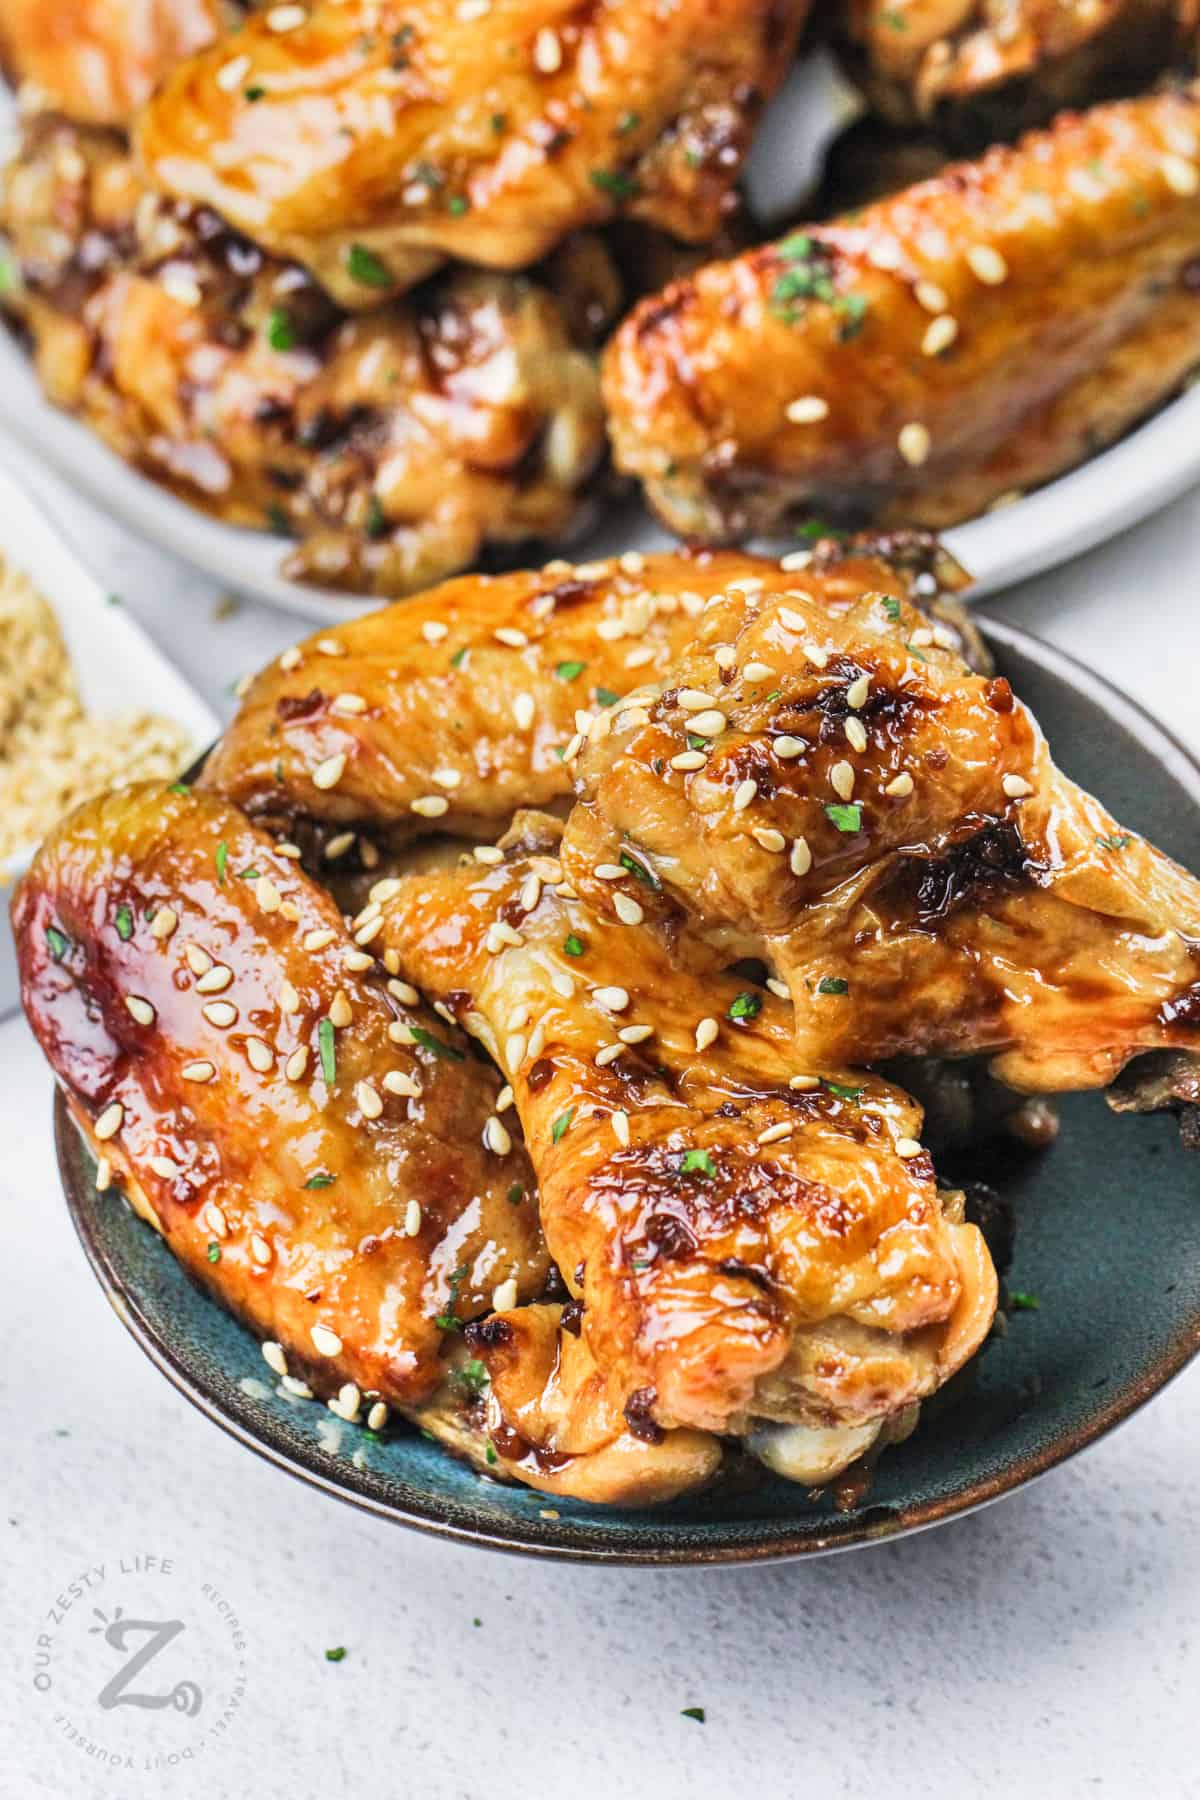 Baked Chicken Thighs (Quick & Easy Prep!) - Our Zesty Life